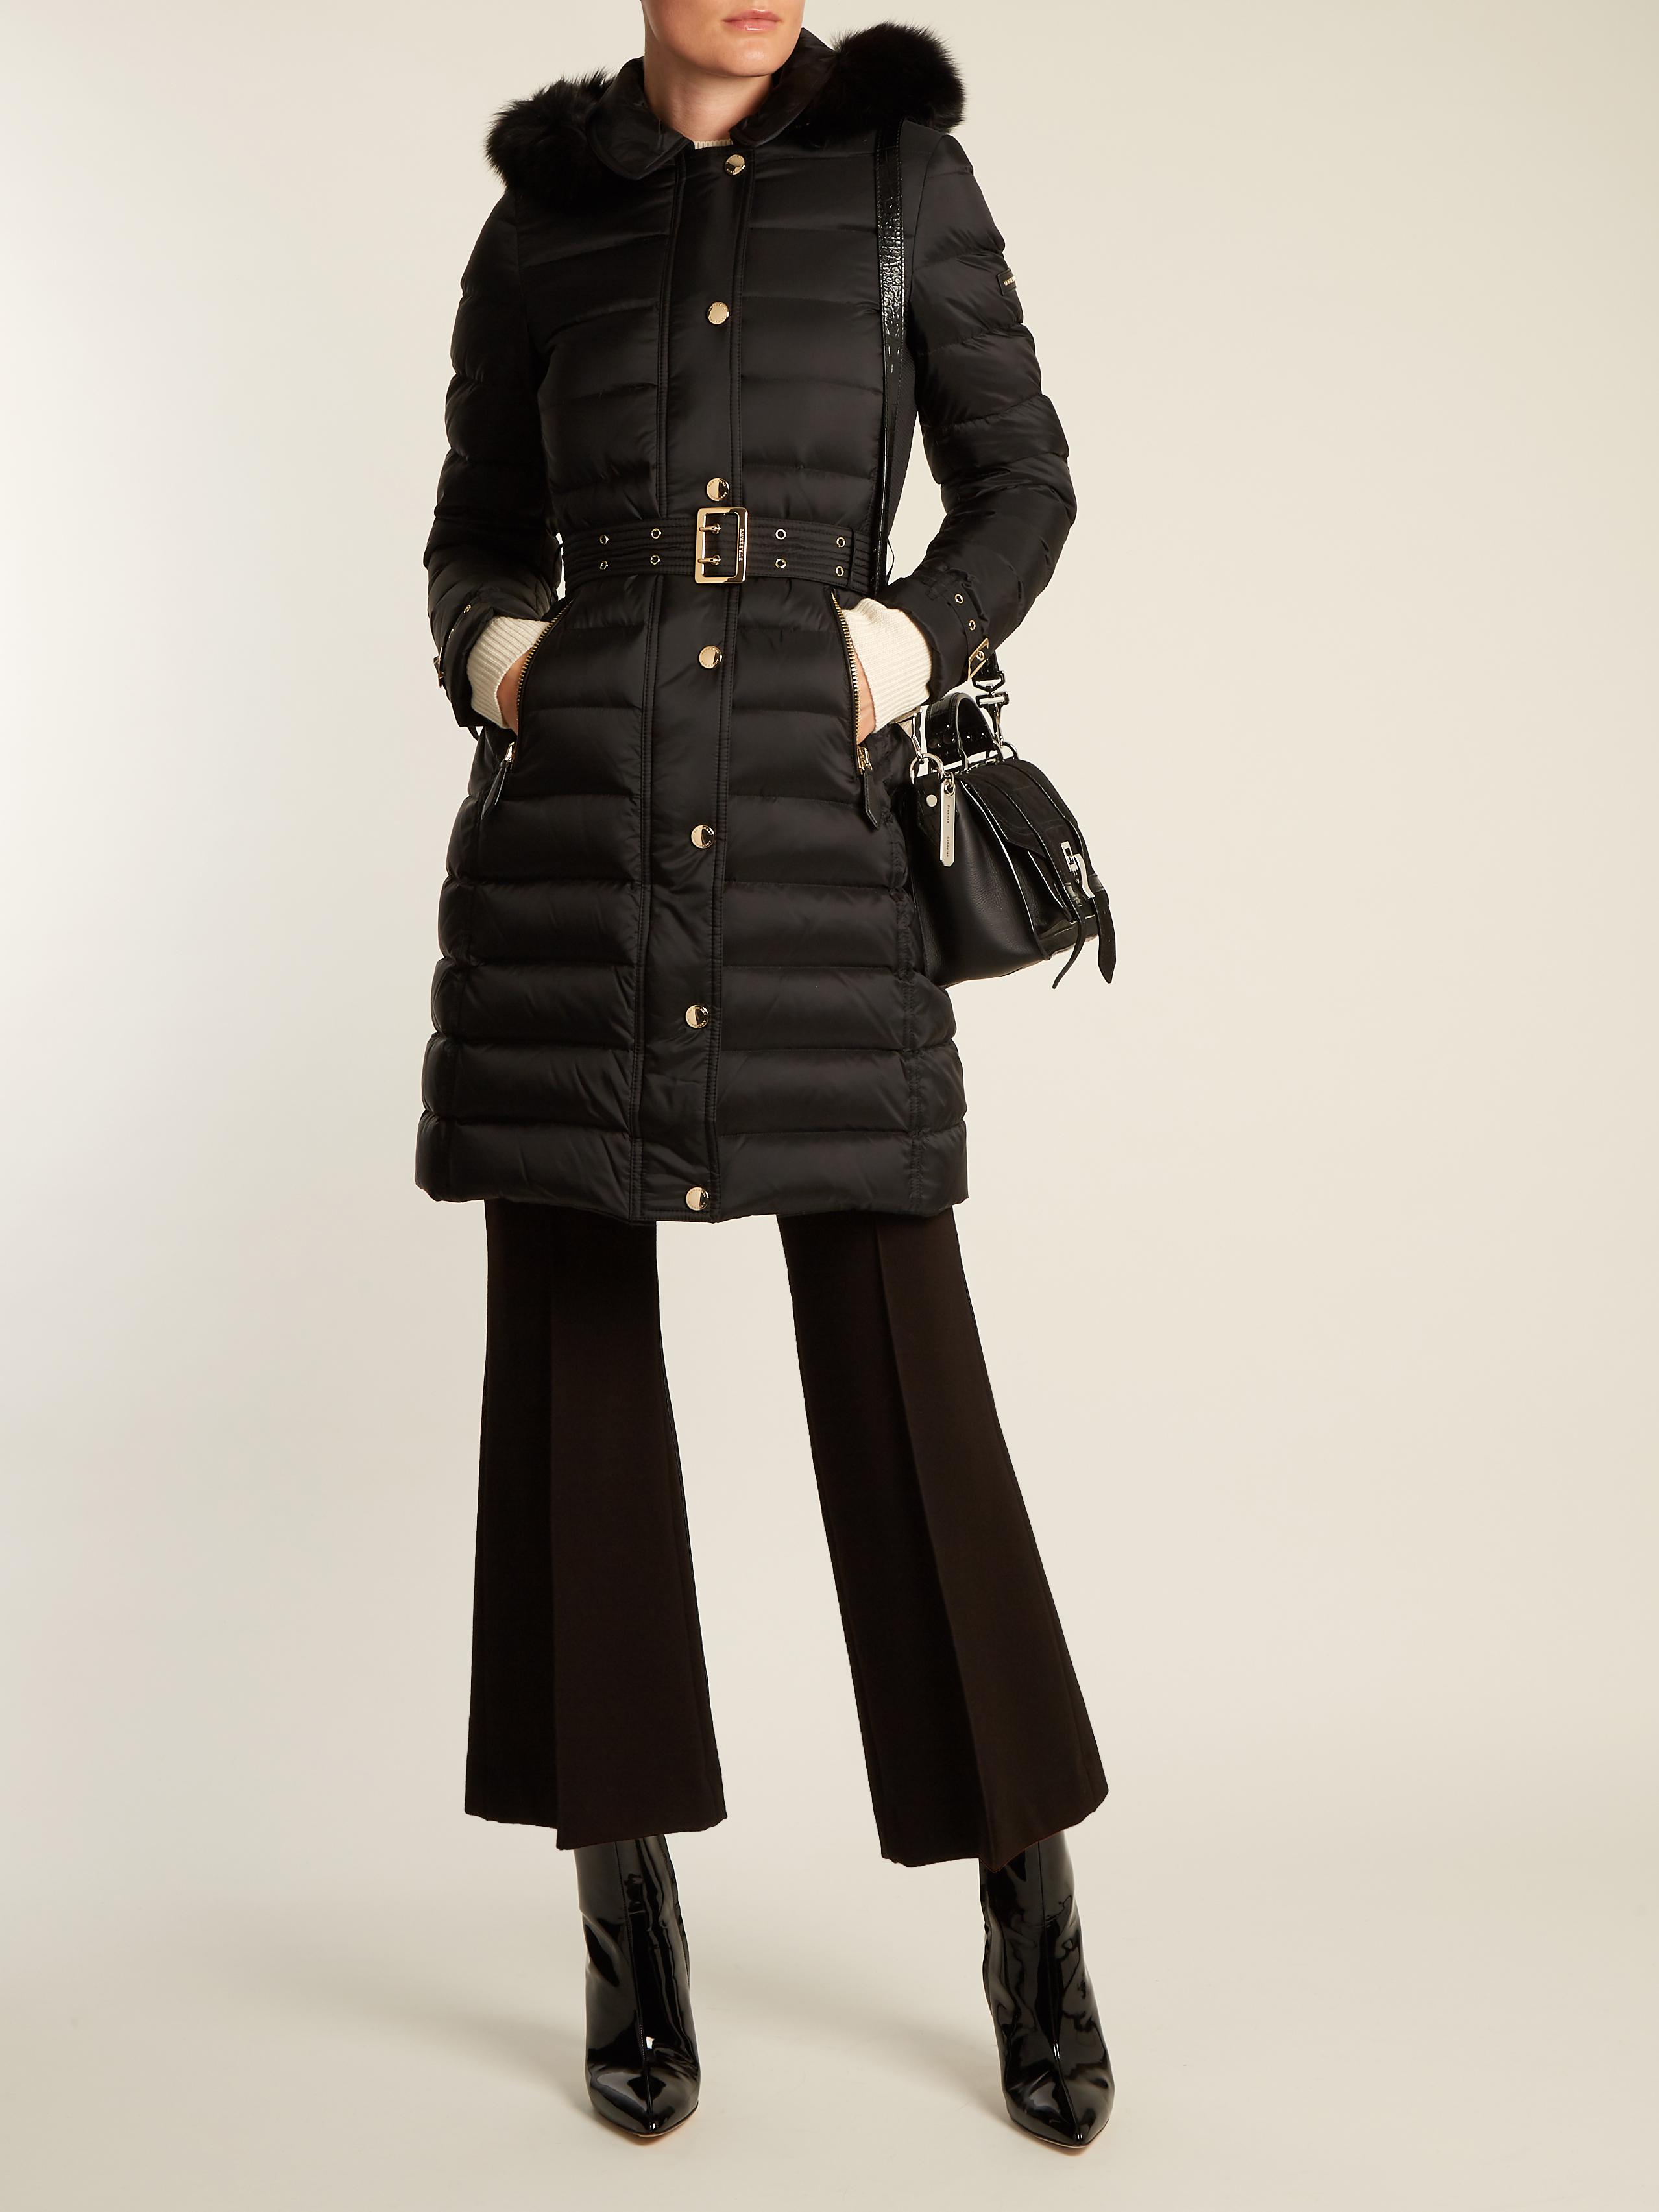 Burberry Goose Ashmore Fur-trimmed Quilted Down Coat in Black - Lyst